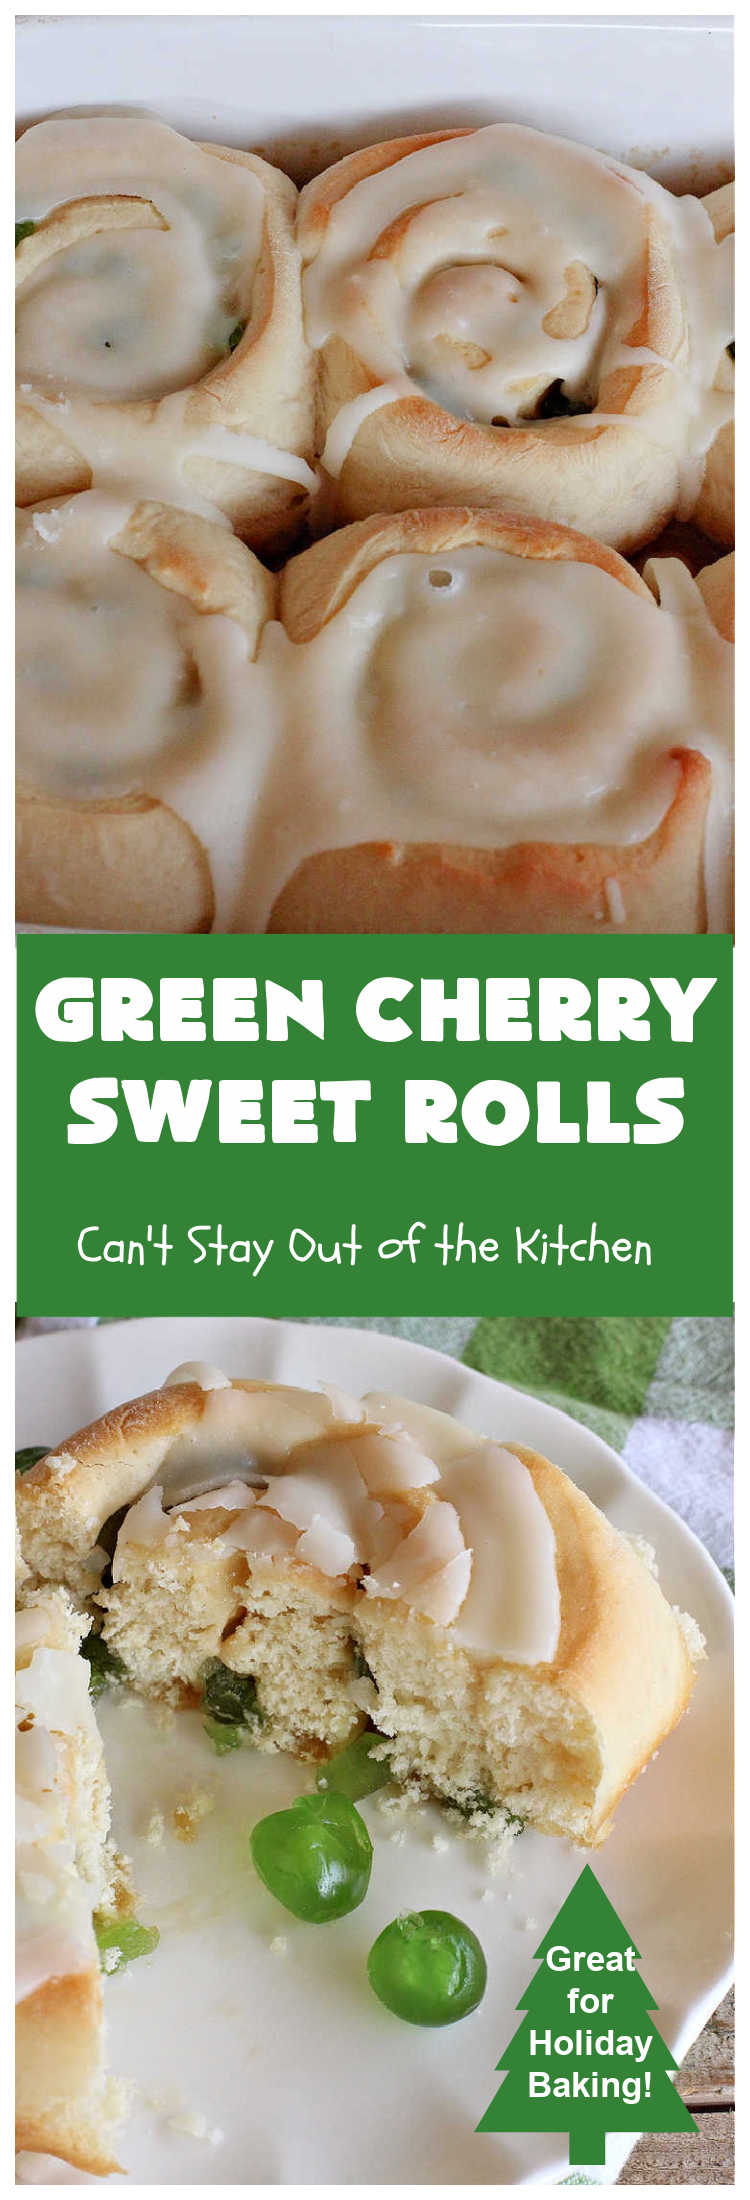 Green Cherry Sweet Rolls | Can't Stay Out of the Kitchen | These fantastic #SweetRolls will knock your socks off! No kidding. They're perfect for a #holiday #breakfast like #Thanksgiving #Christmas or #NewYearsDay. If you want to wow your family and friends, serve up a batch of these rolls. They'll be drooling from the first bite! #almond #cherries #GreenCherries #CherrySweetRolls #ParadiseFruitCompany #ParadiseCandiedFruit #HolidayBreakfast #GreenCherrySweetRolls